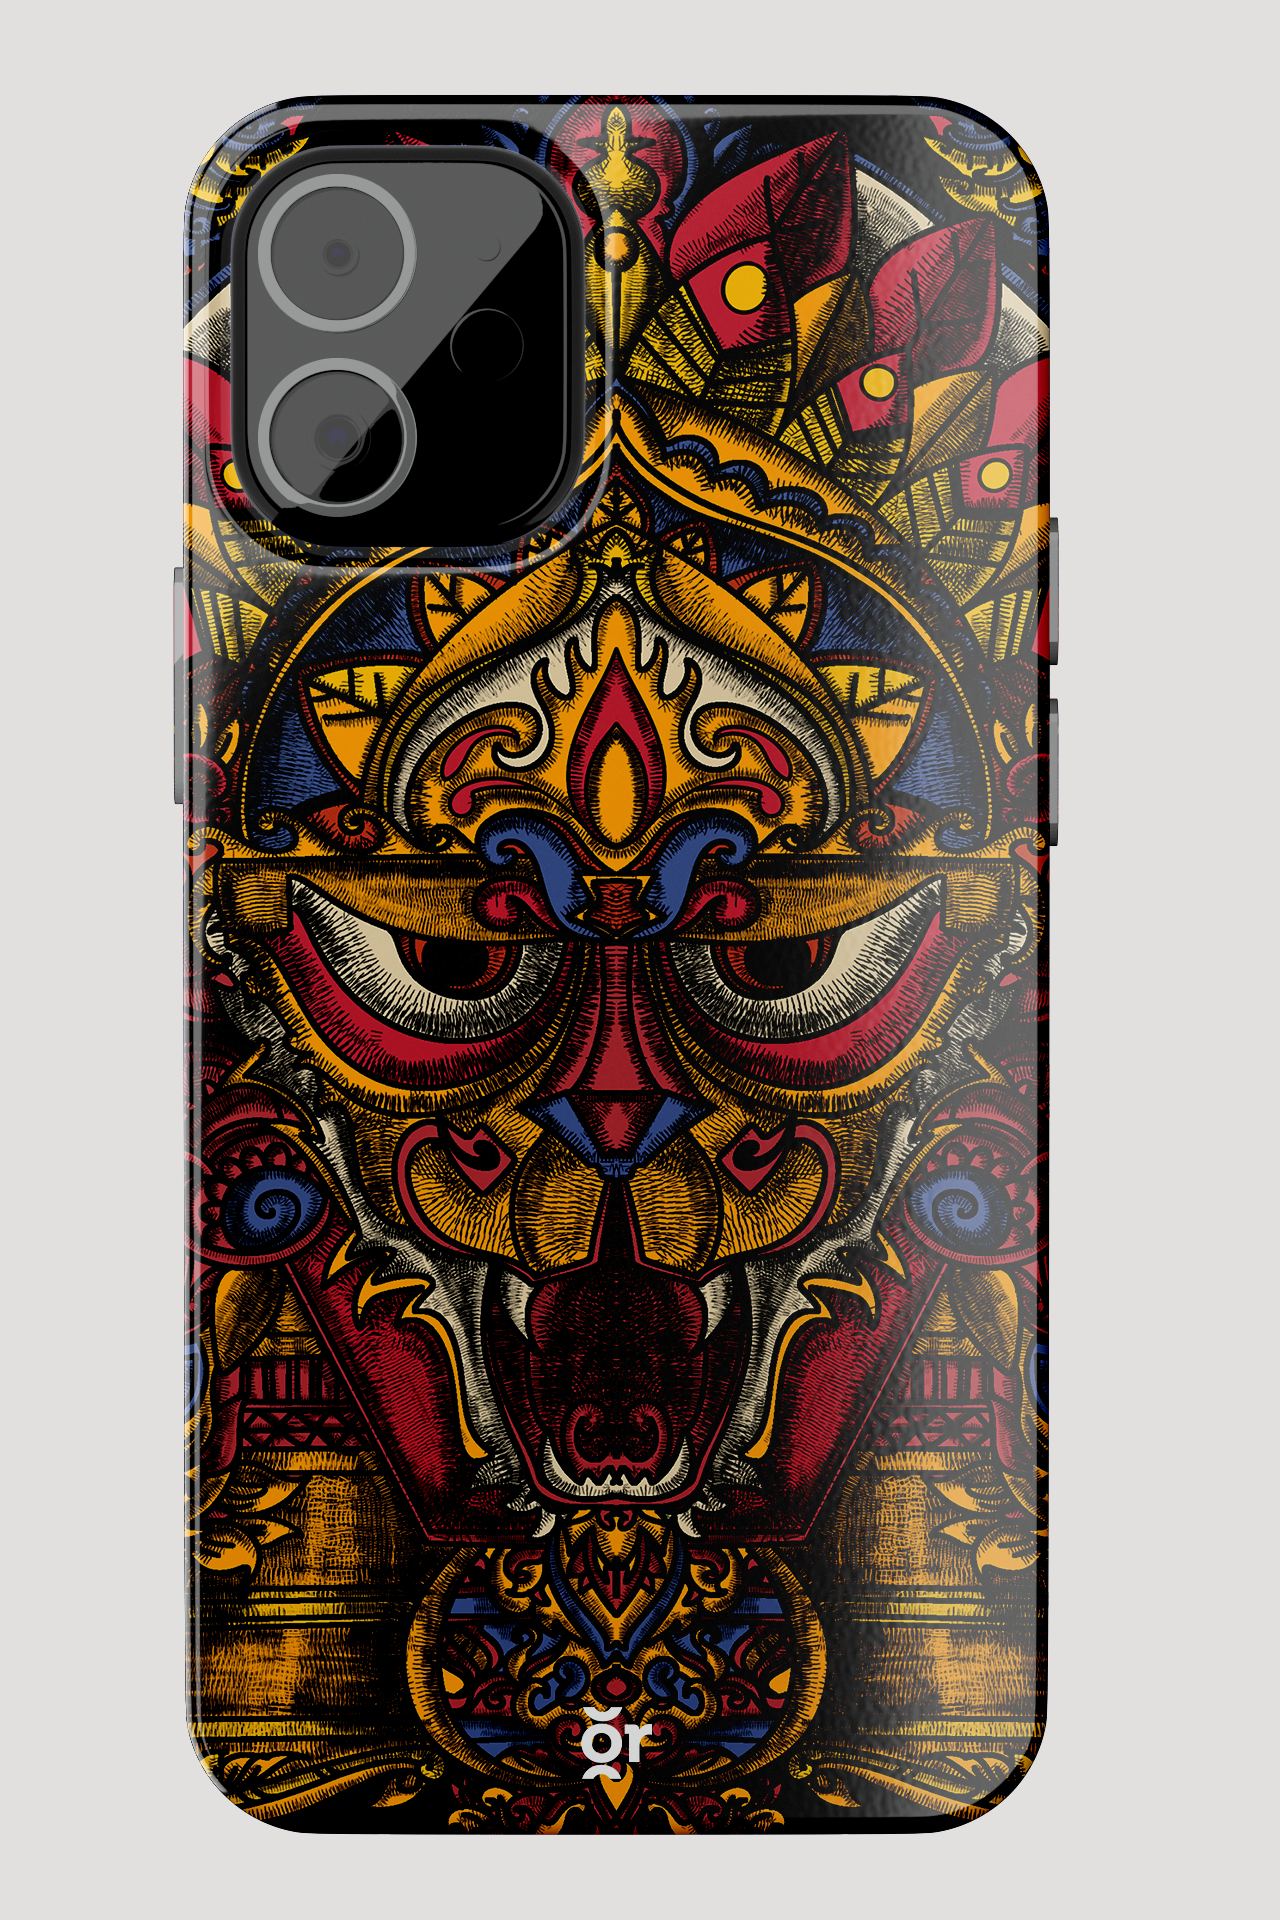 MOBILE CASE COVER: PATTERN 6